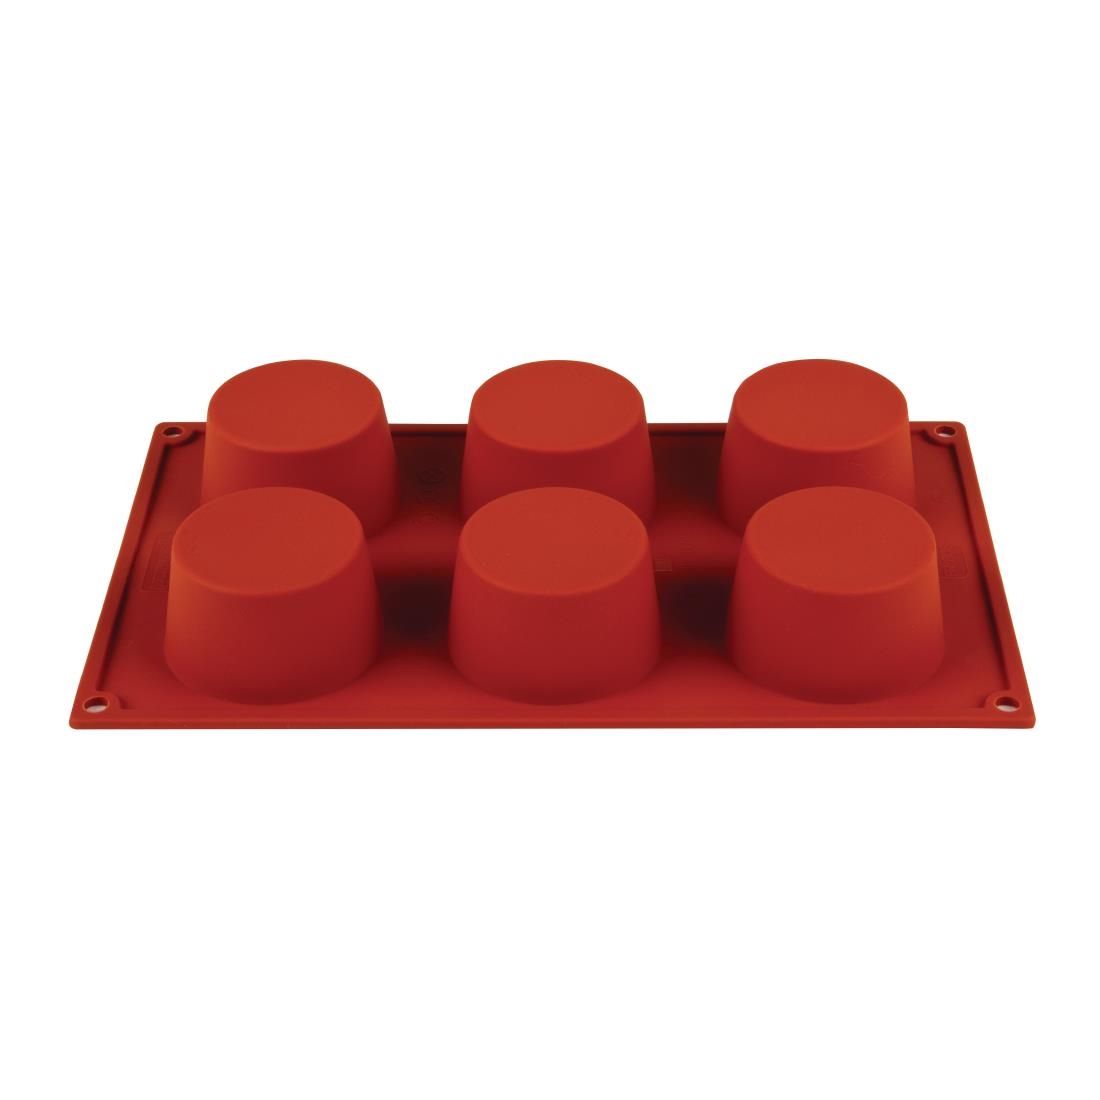 N933 Pavoni Formaflex Silicone Muffin Mould 6 Cup